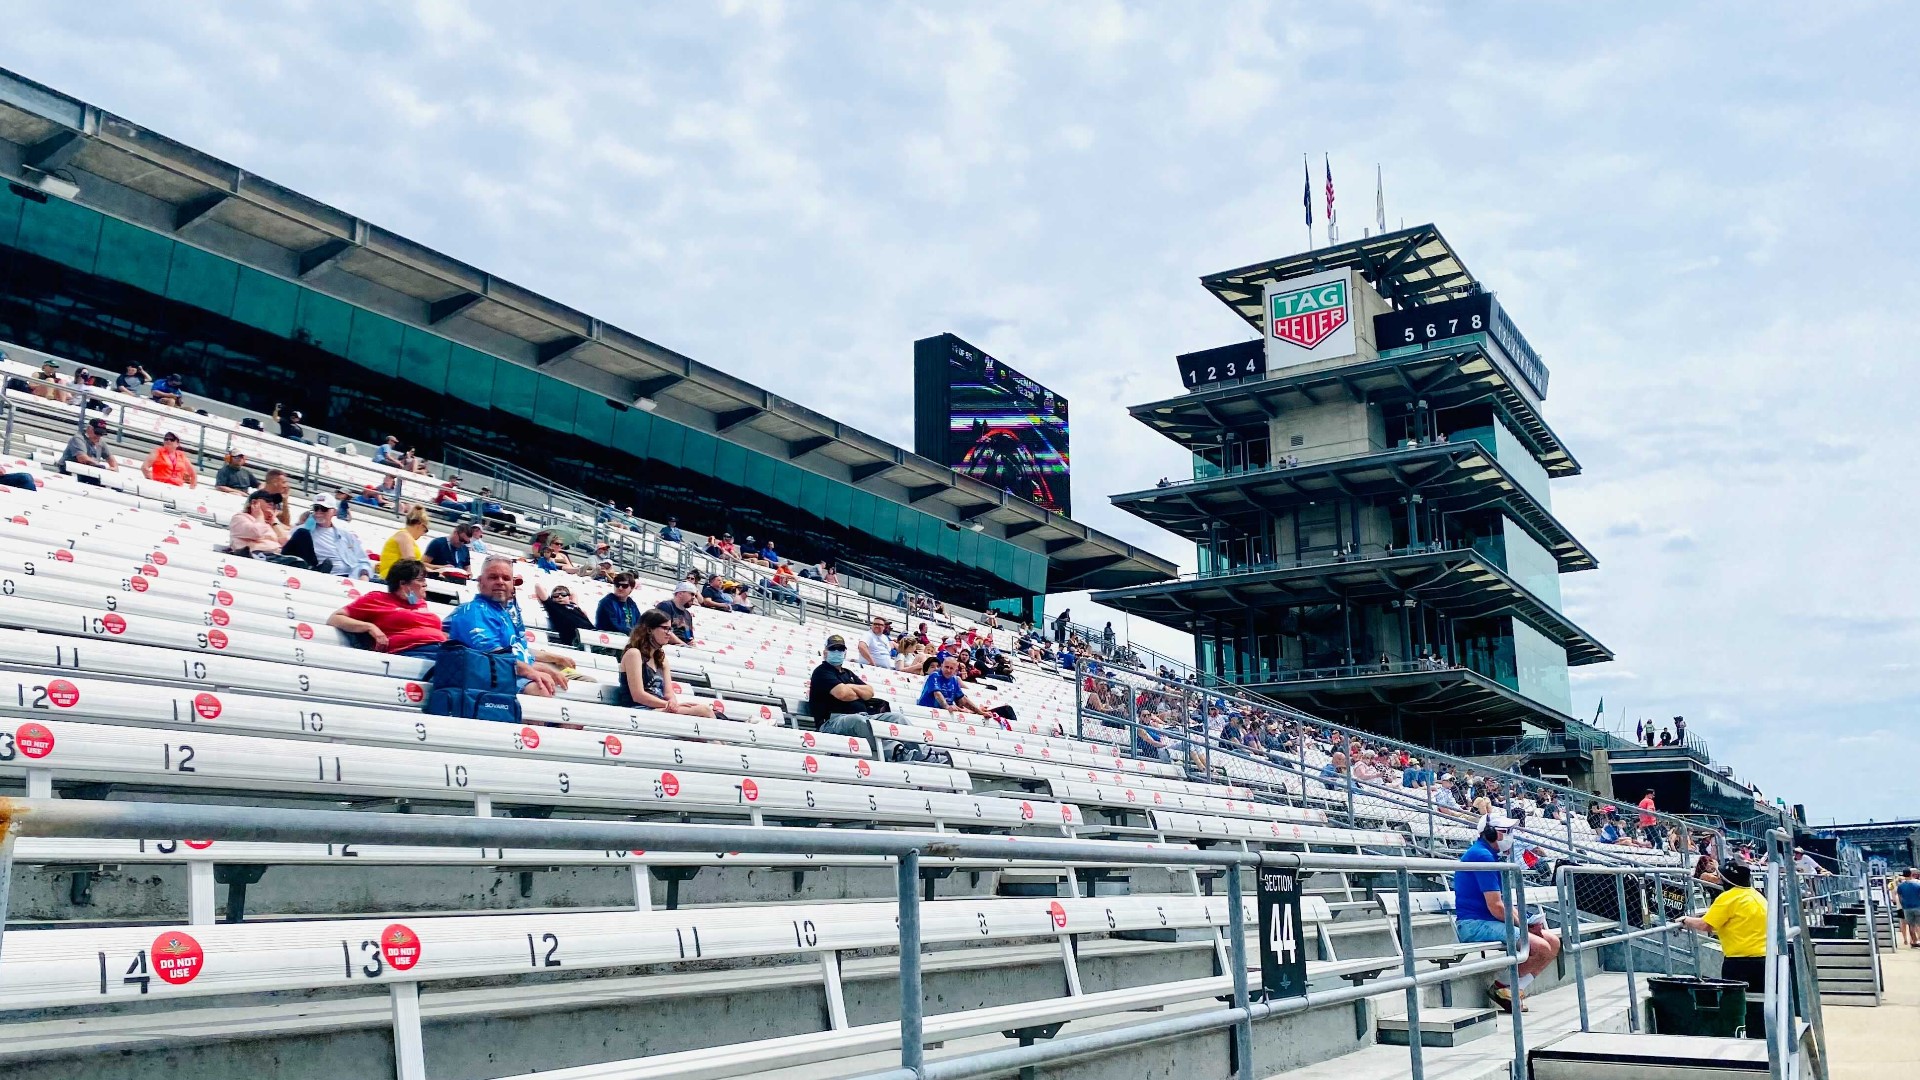 The race was somewhat like a test run for the Indianapolis 500. About 25,000 fans attended Saturday’s race compared to the 135,000 fans expected on May 30th.